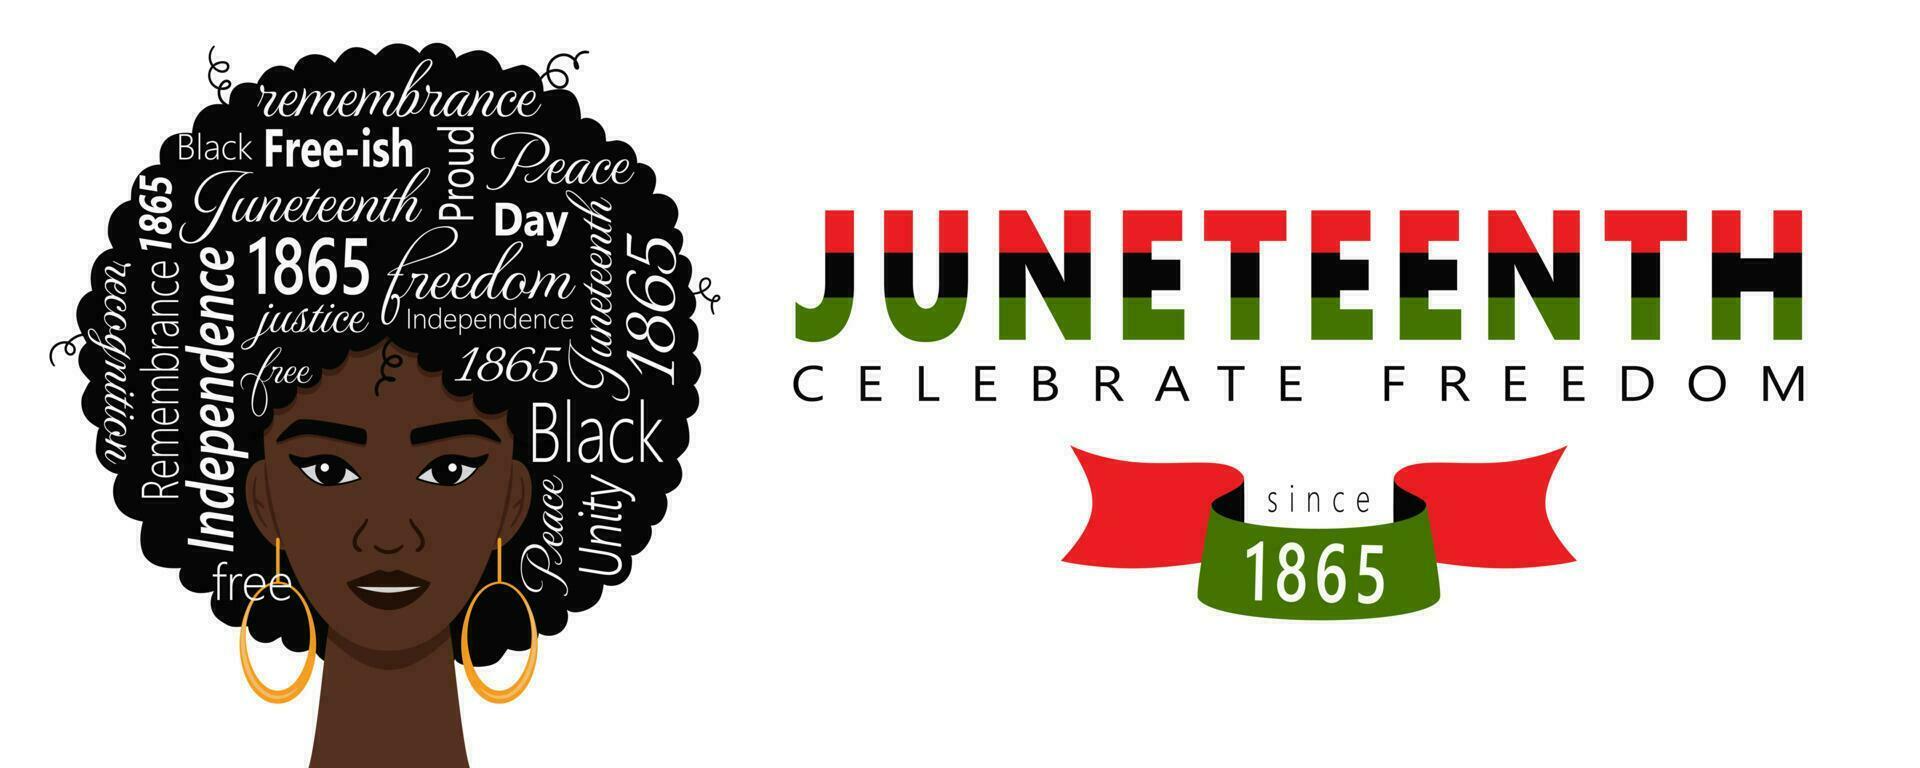 Juneteenth. Celebrate Freedom. Banner With Black Haired Woman And Words Symbolizing African American History And Heritage, National Independence Day. Vector illustration On A White Background